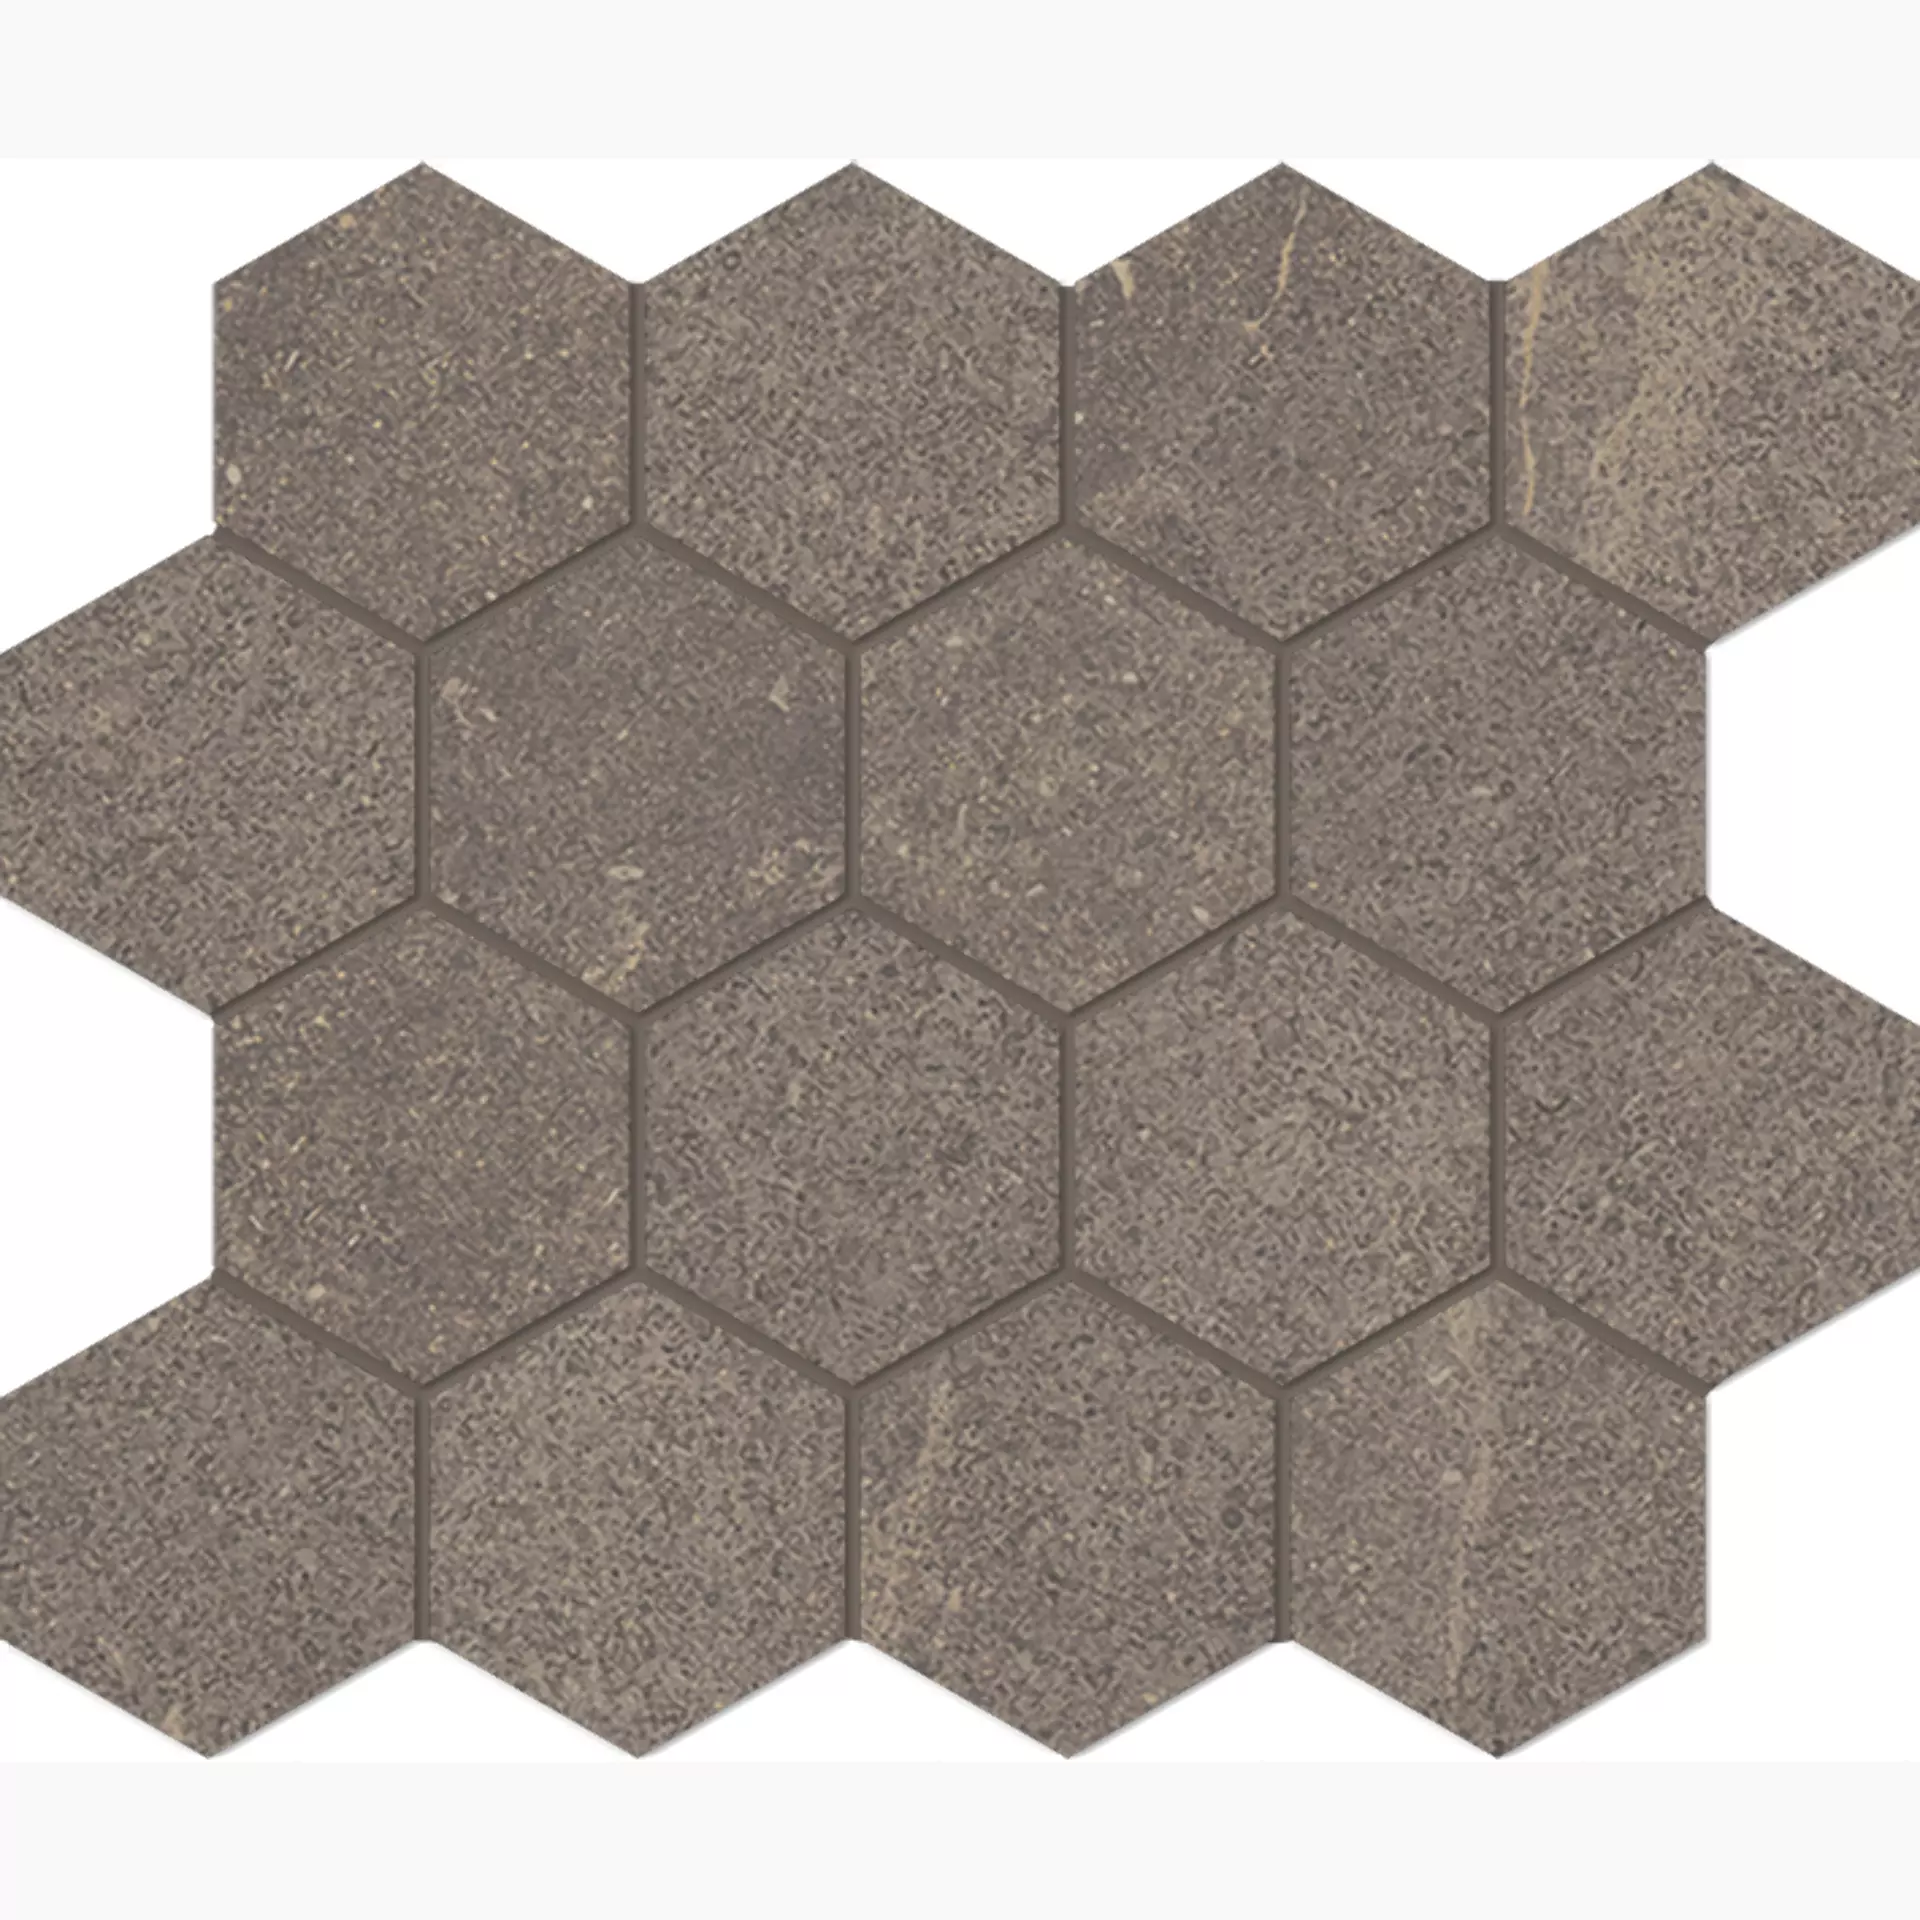 Fondovalle Planeto Mars Natural Mosaic Hexagon PNT033A 26x30cm rectified 8,5mm